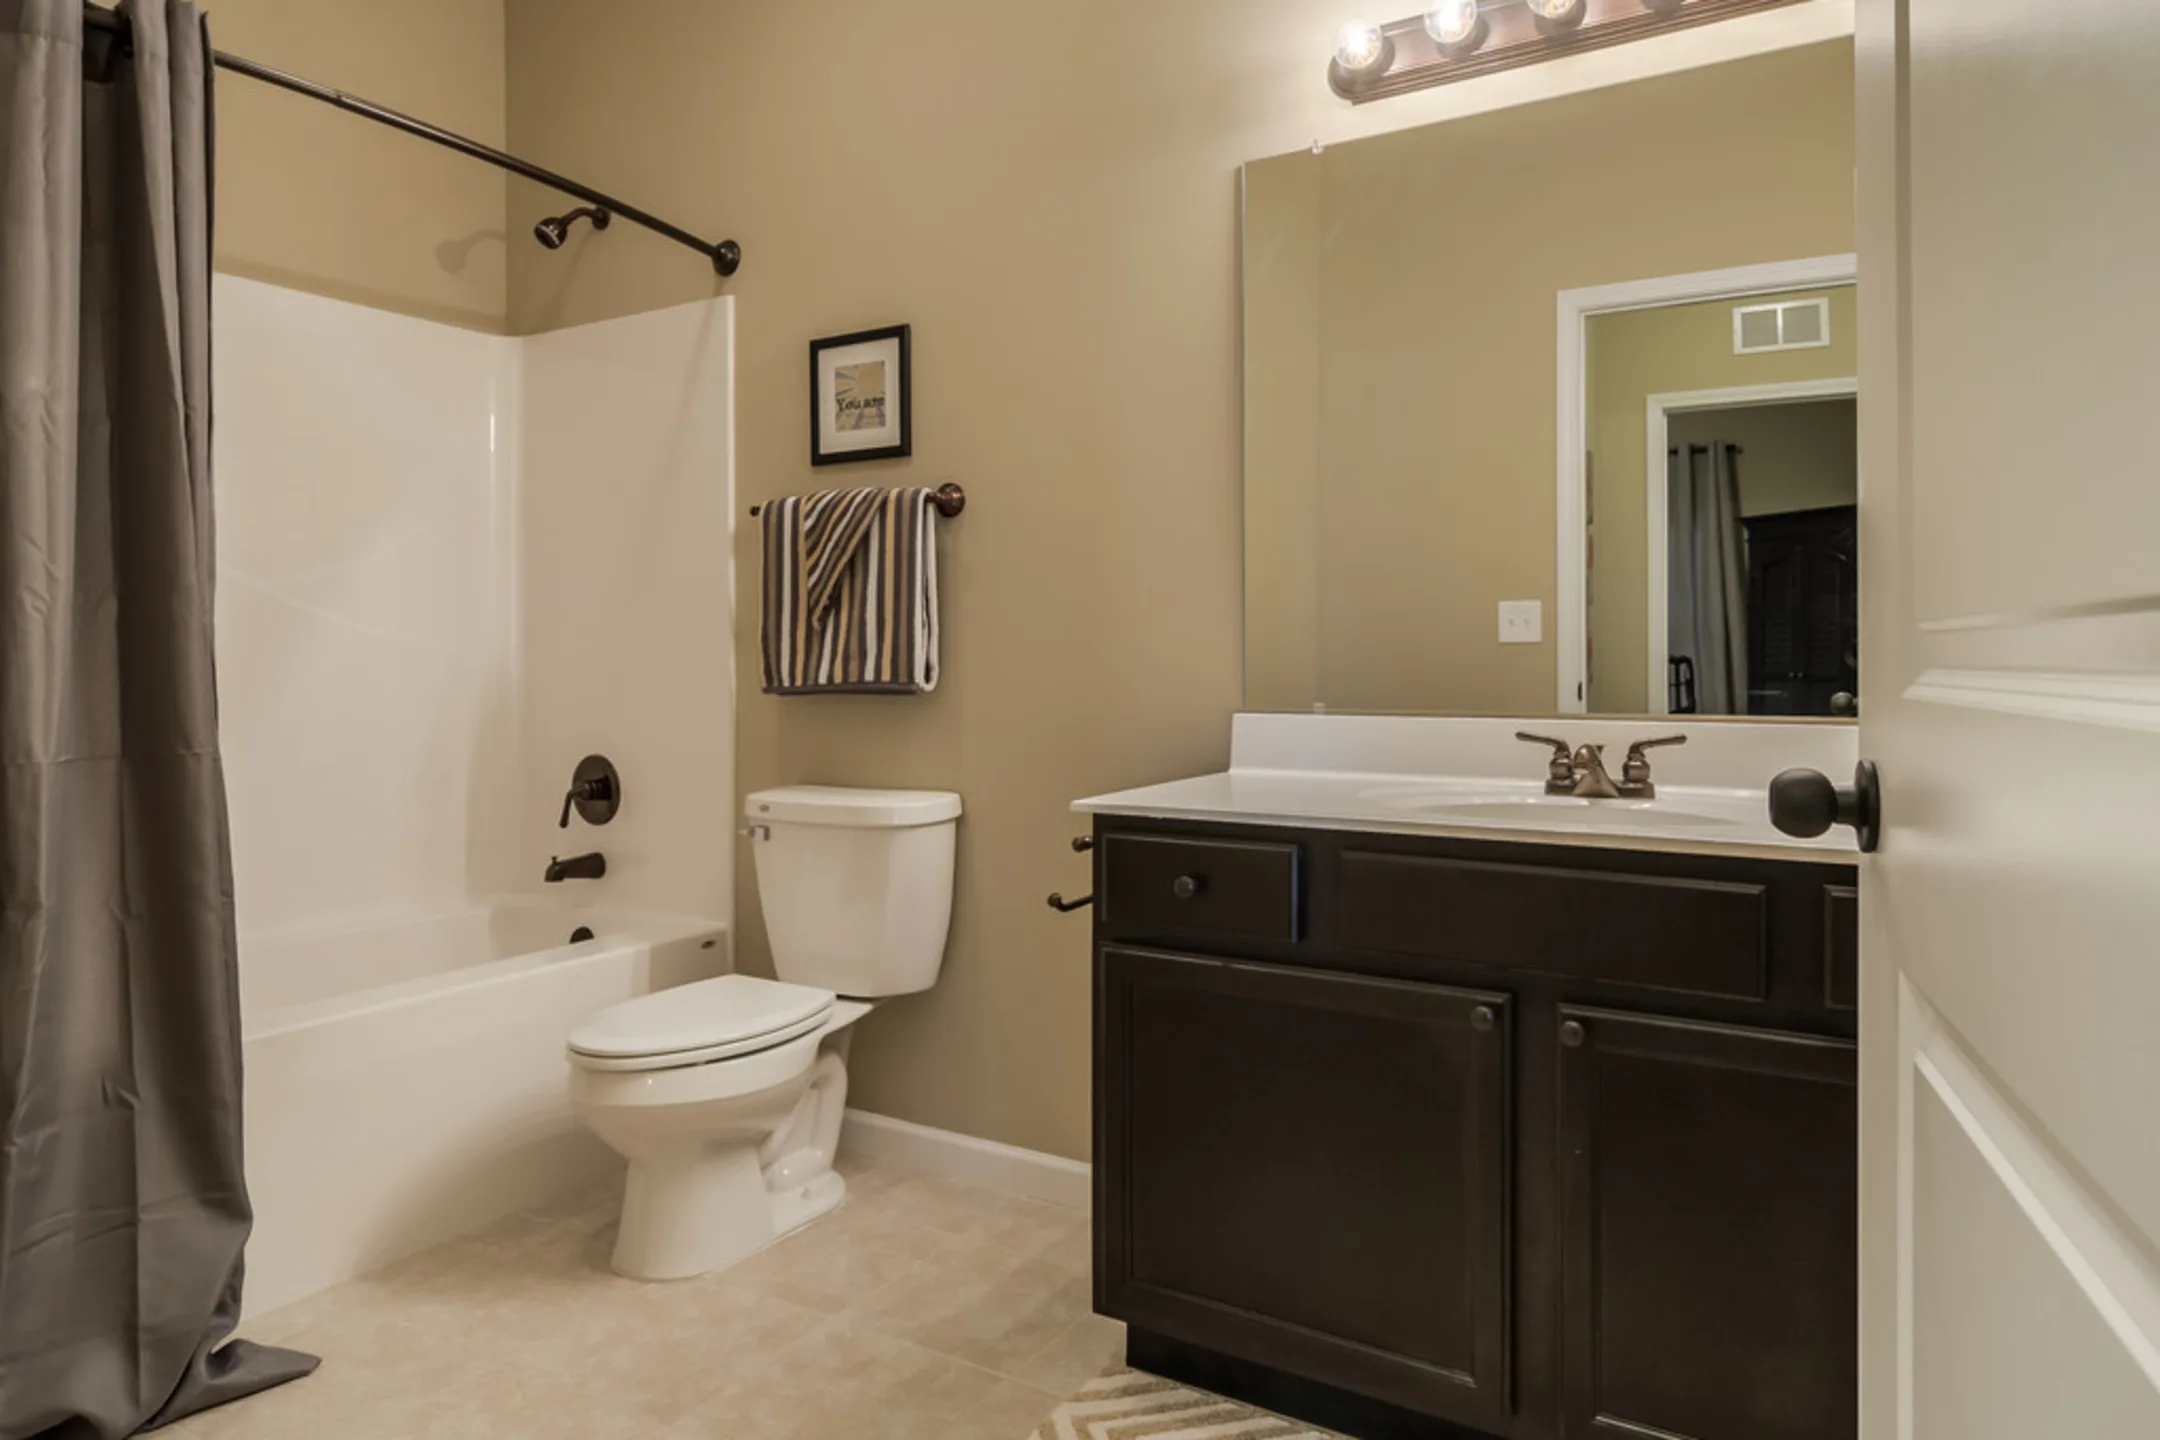 Bathroom - Cumberland Trace Village Apartments - Bowling Green, KY